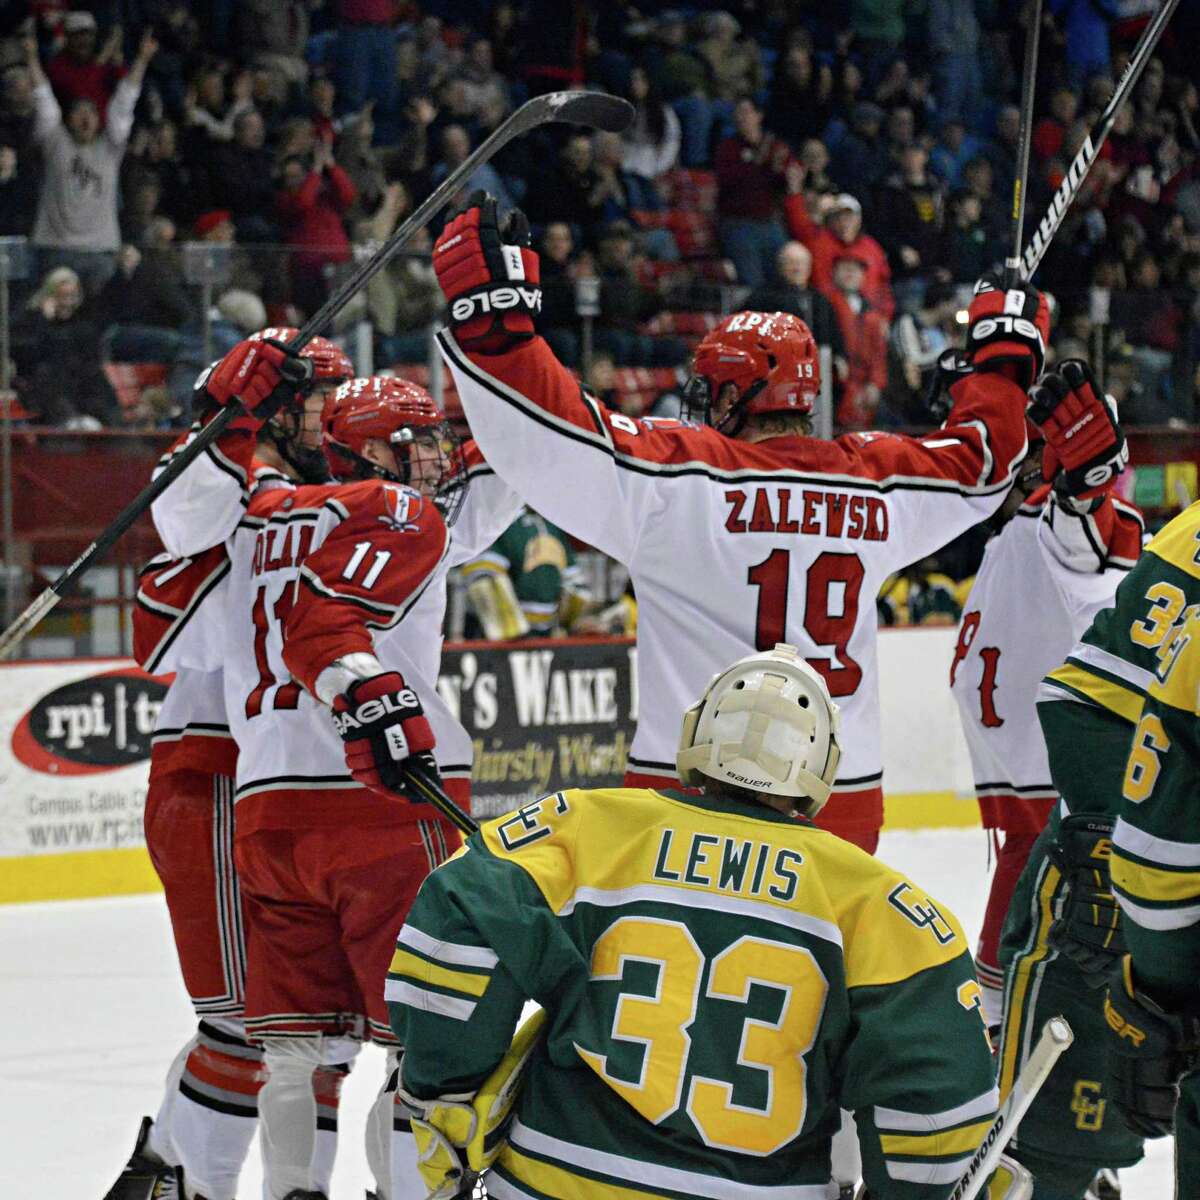 RPI players celebrate a goal ny Milos Bubela in front of Clarkson's goalie Greg Lewis during Friday's game at the Houston Field House in Troy Friday March 1, 2013. (John Carl D'Annibale / Times Union)